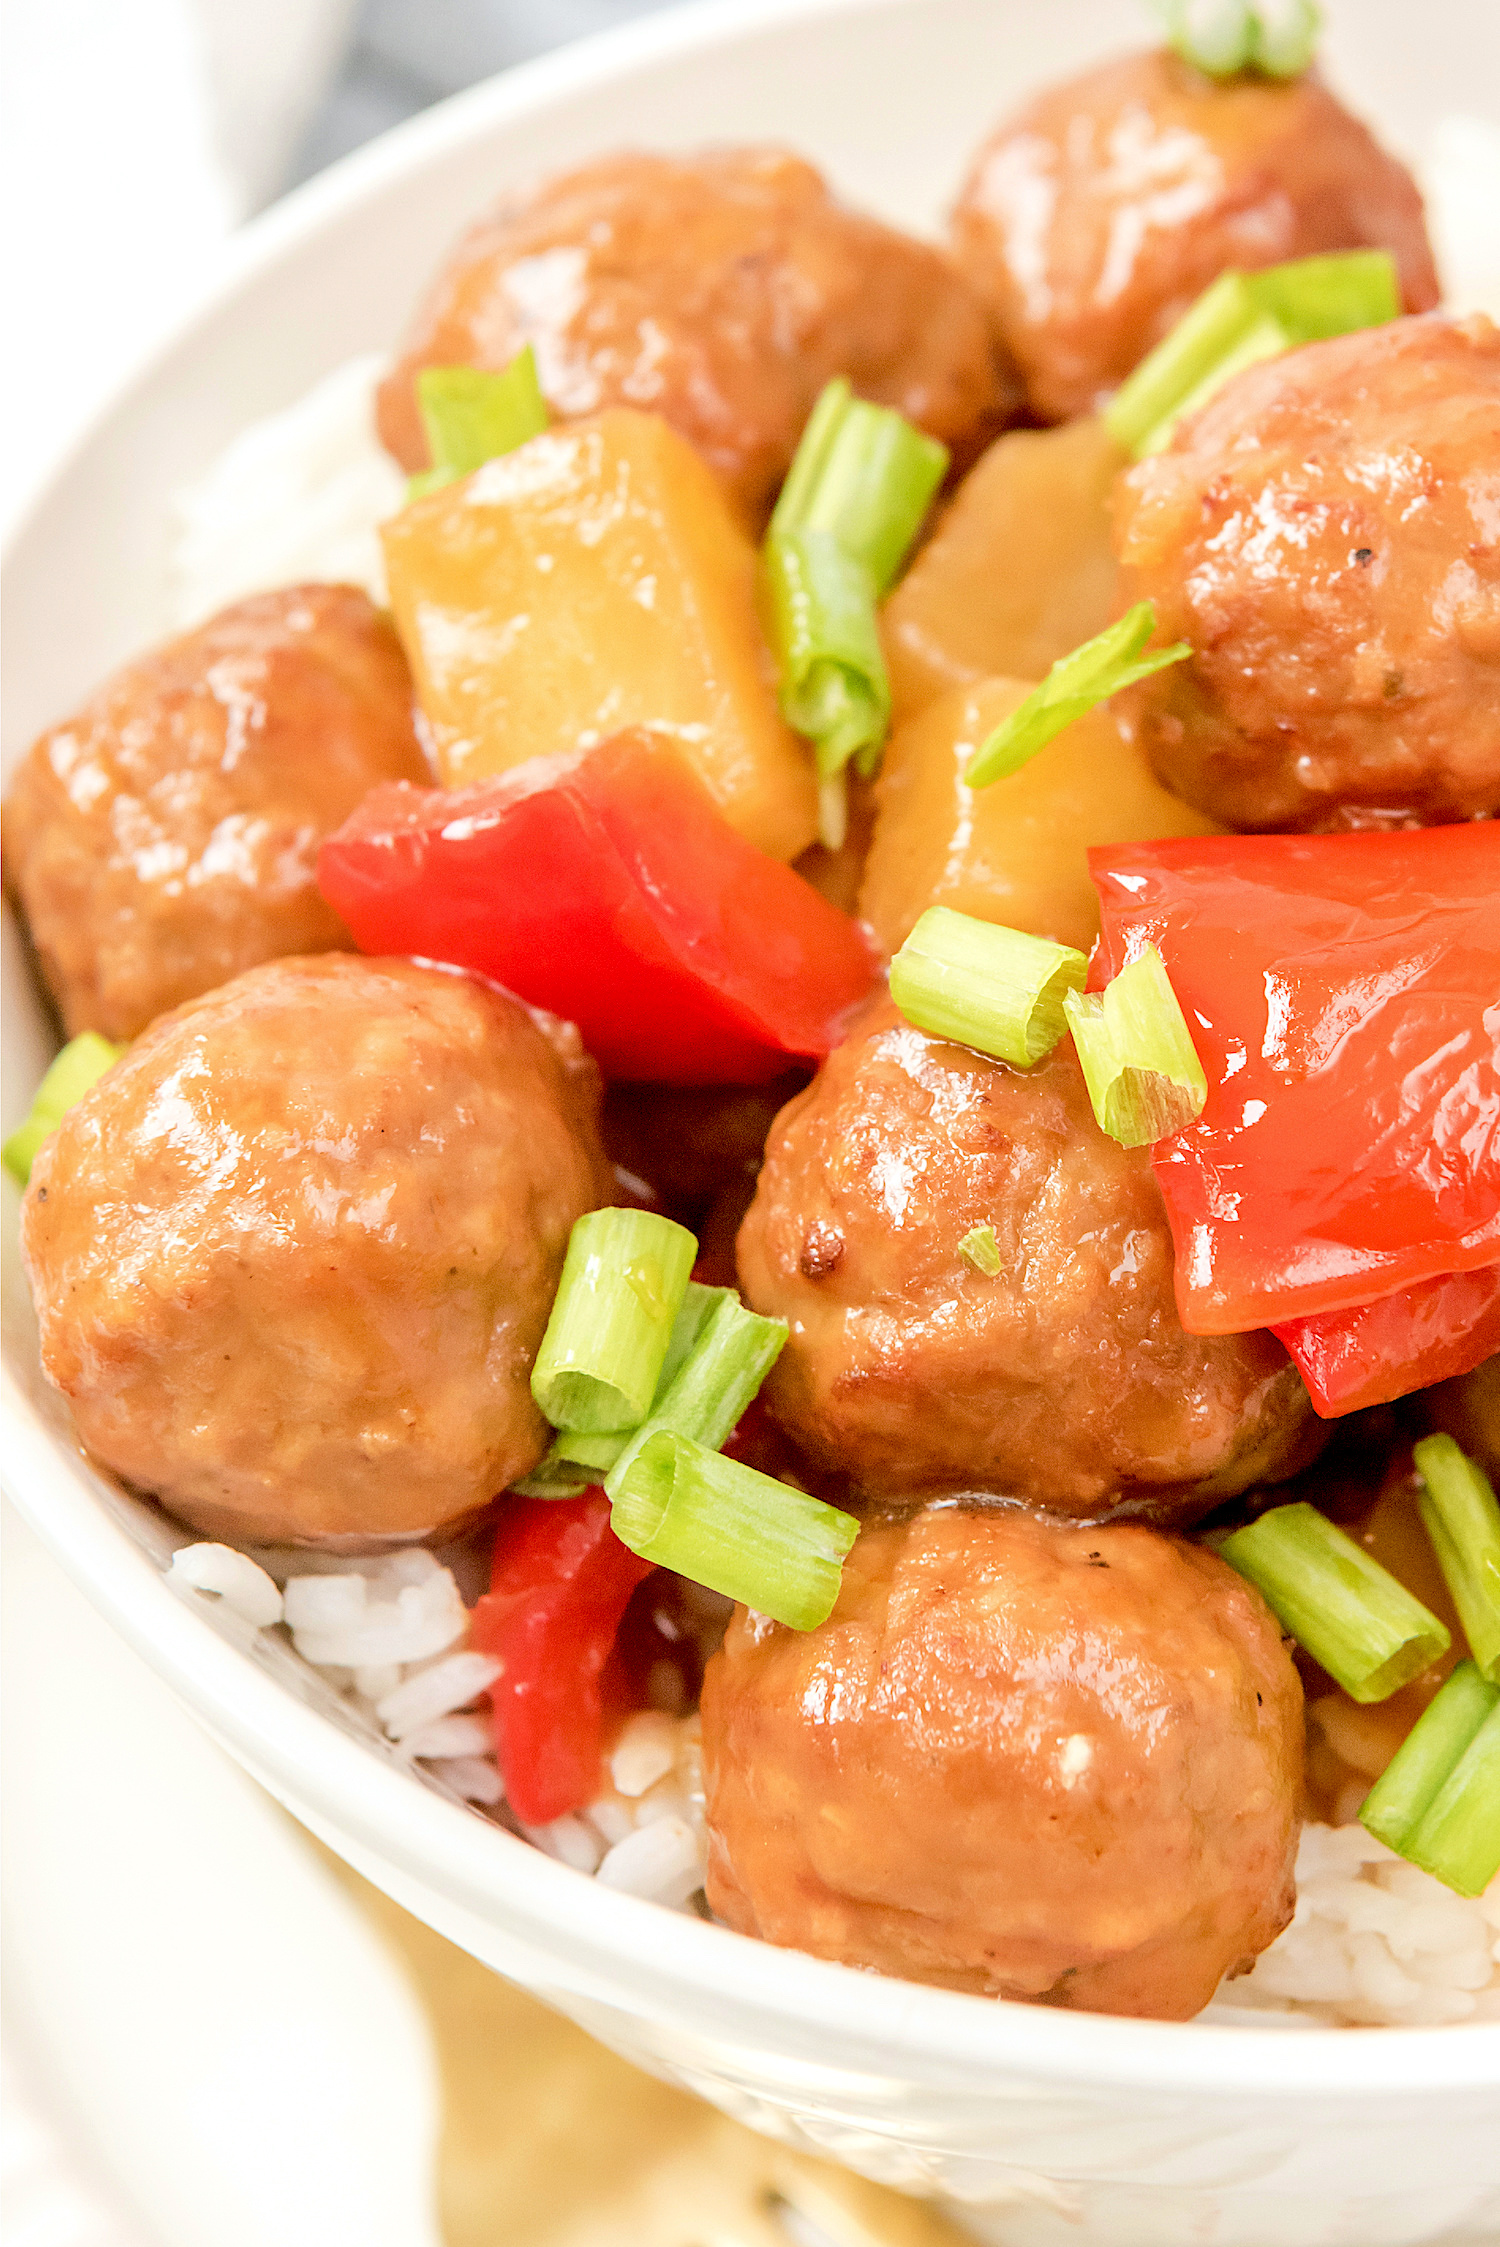 Slow Cooker Dinner Recipe - Sweet and Sour Meatballs